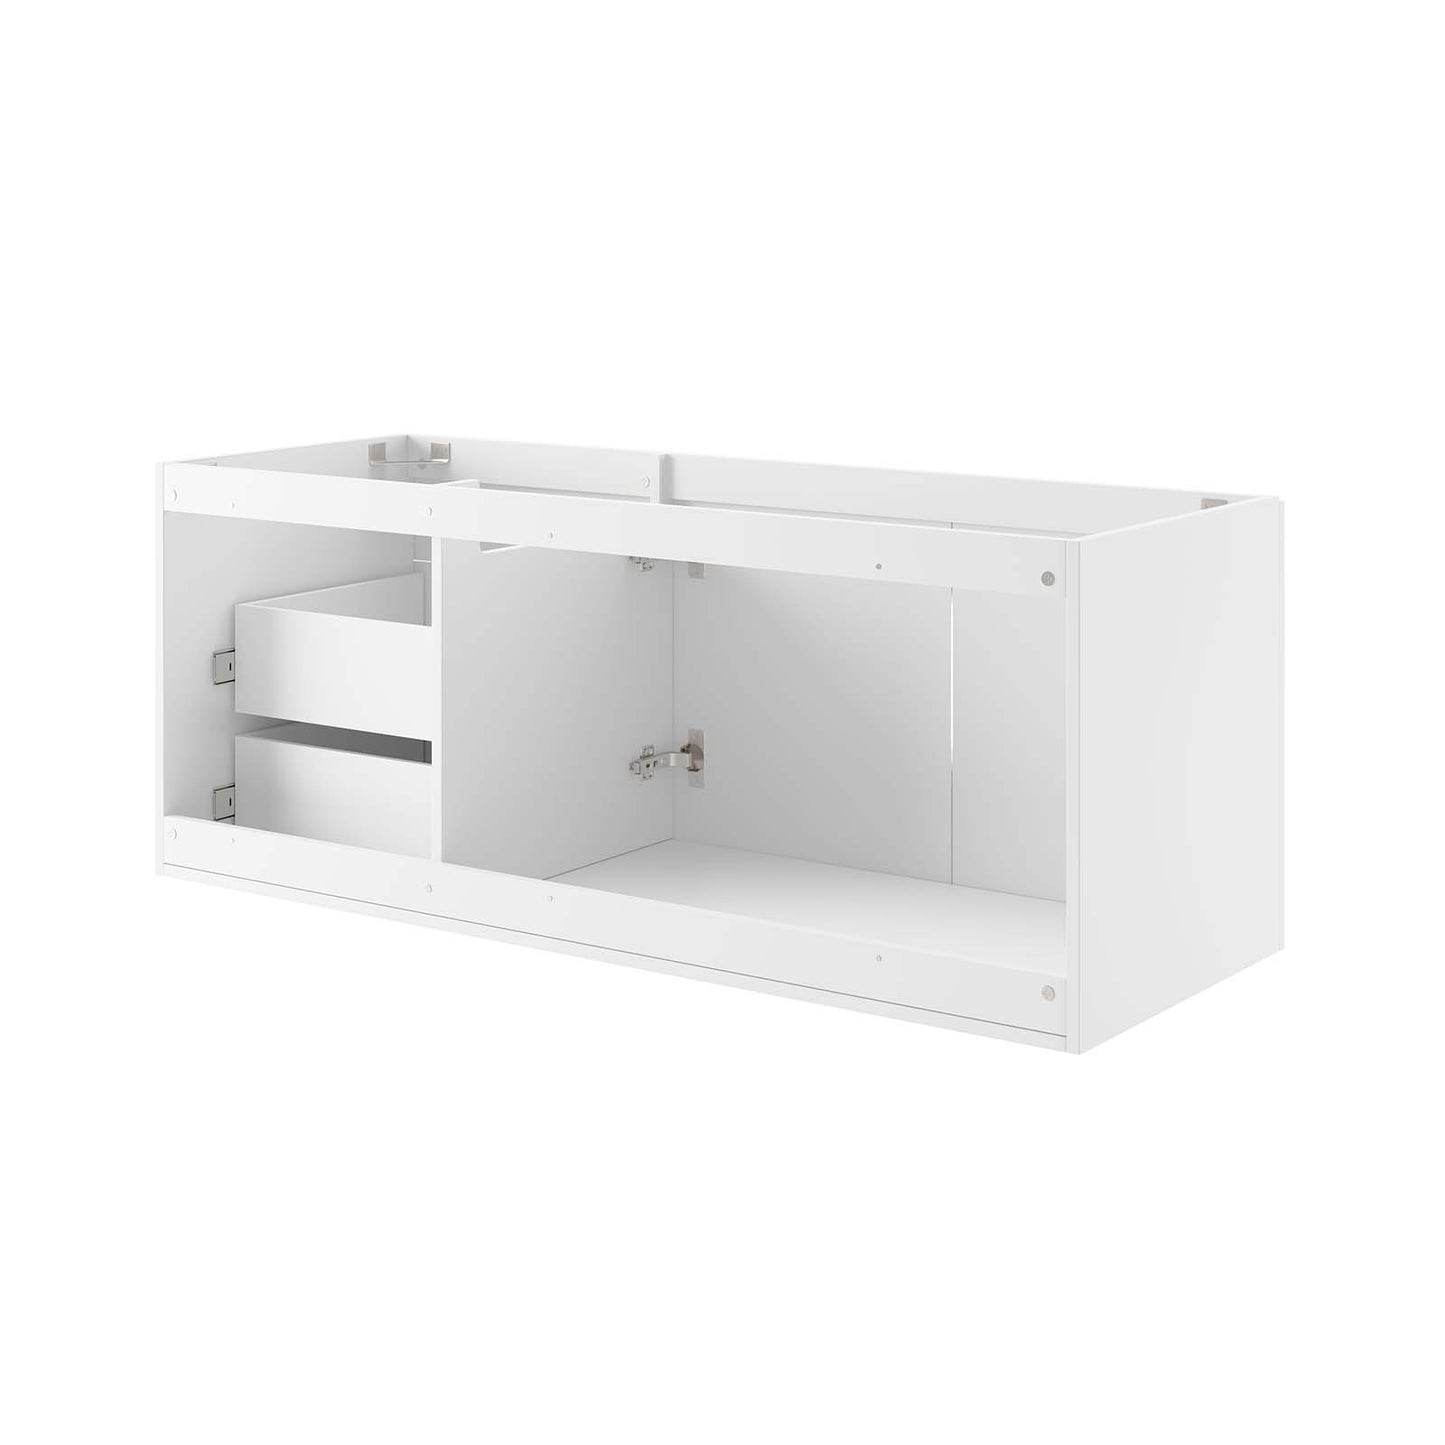 Vitality 48" Double or Single Sink Compatible (Not Included) Bathroom Vanity Cabinet White EEI-4895-WHI